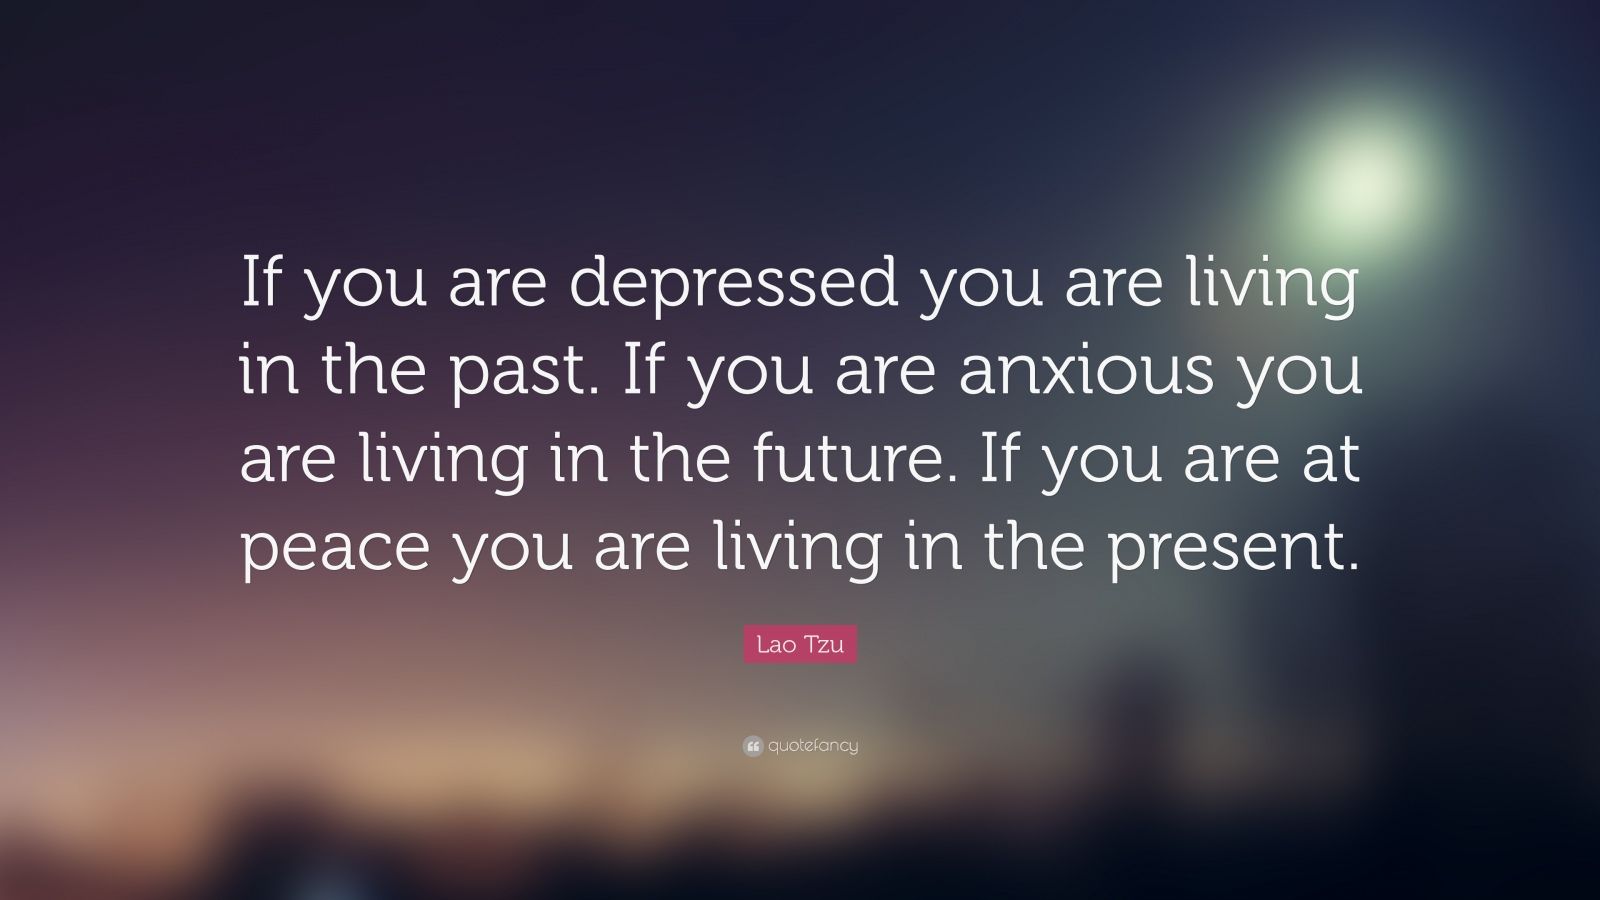 Lao Tzu Quote: “If you are depressed you are living in the past. If you ...